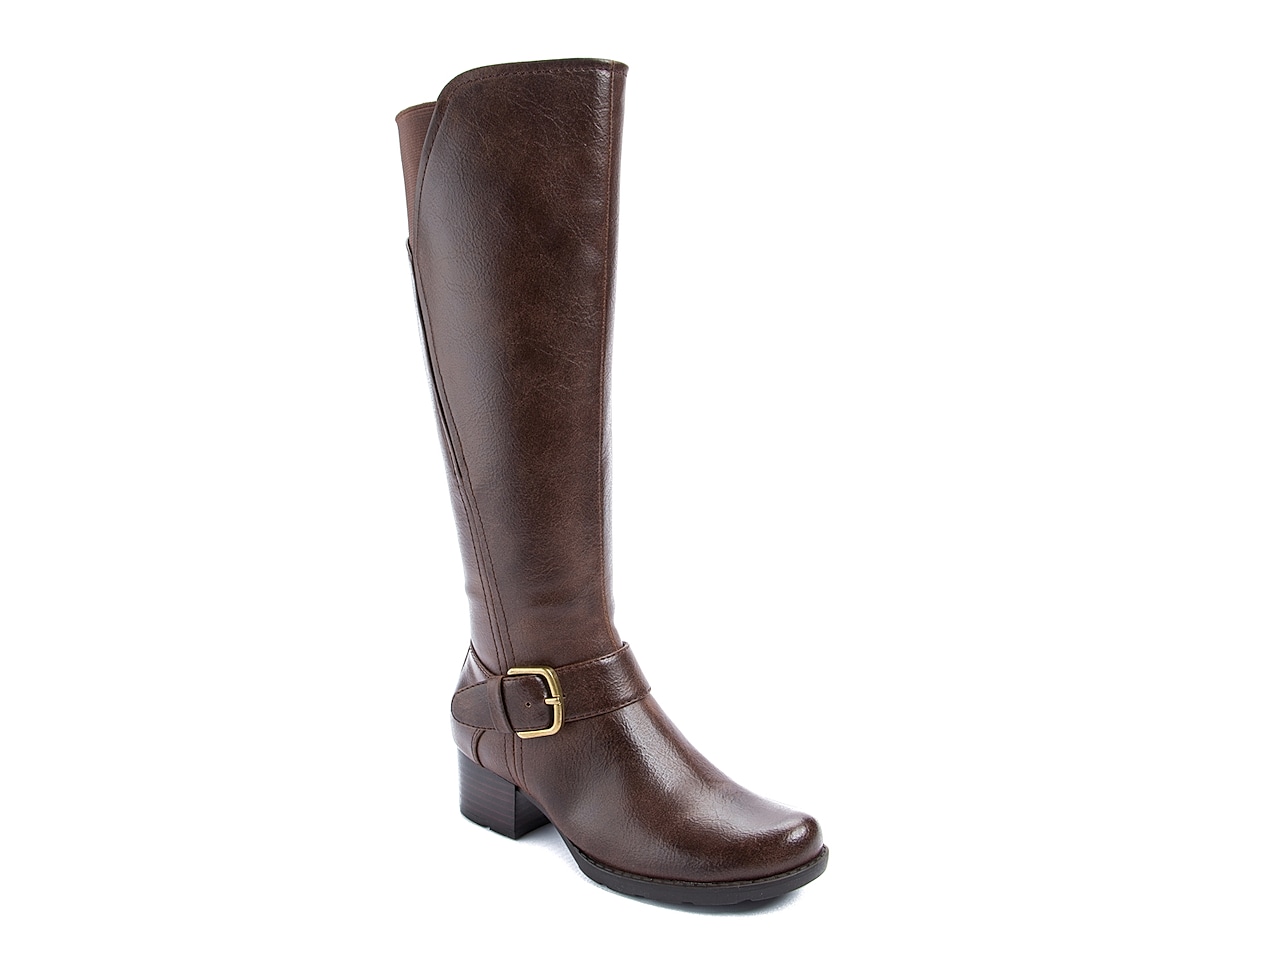 Bare Traps Callipso Wide Calf Riding Boot Women's Shoes | DSW